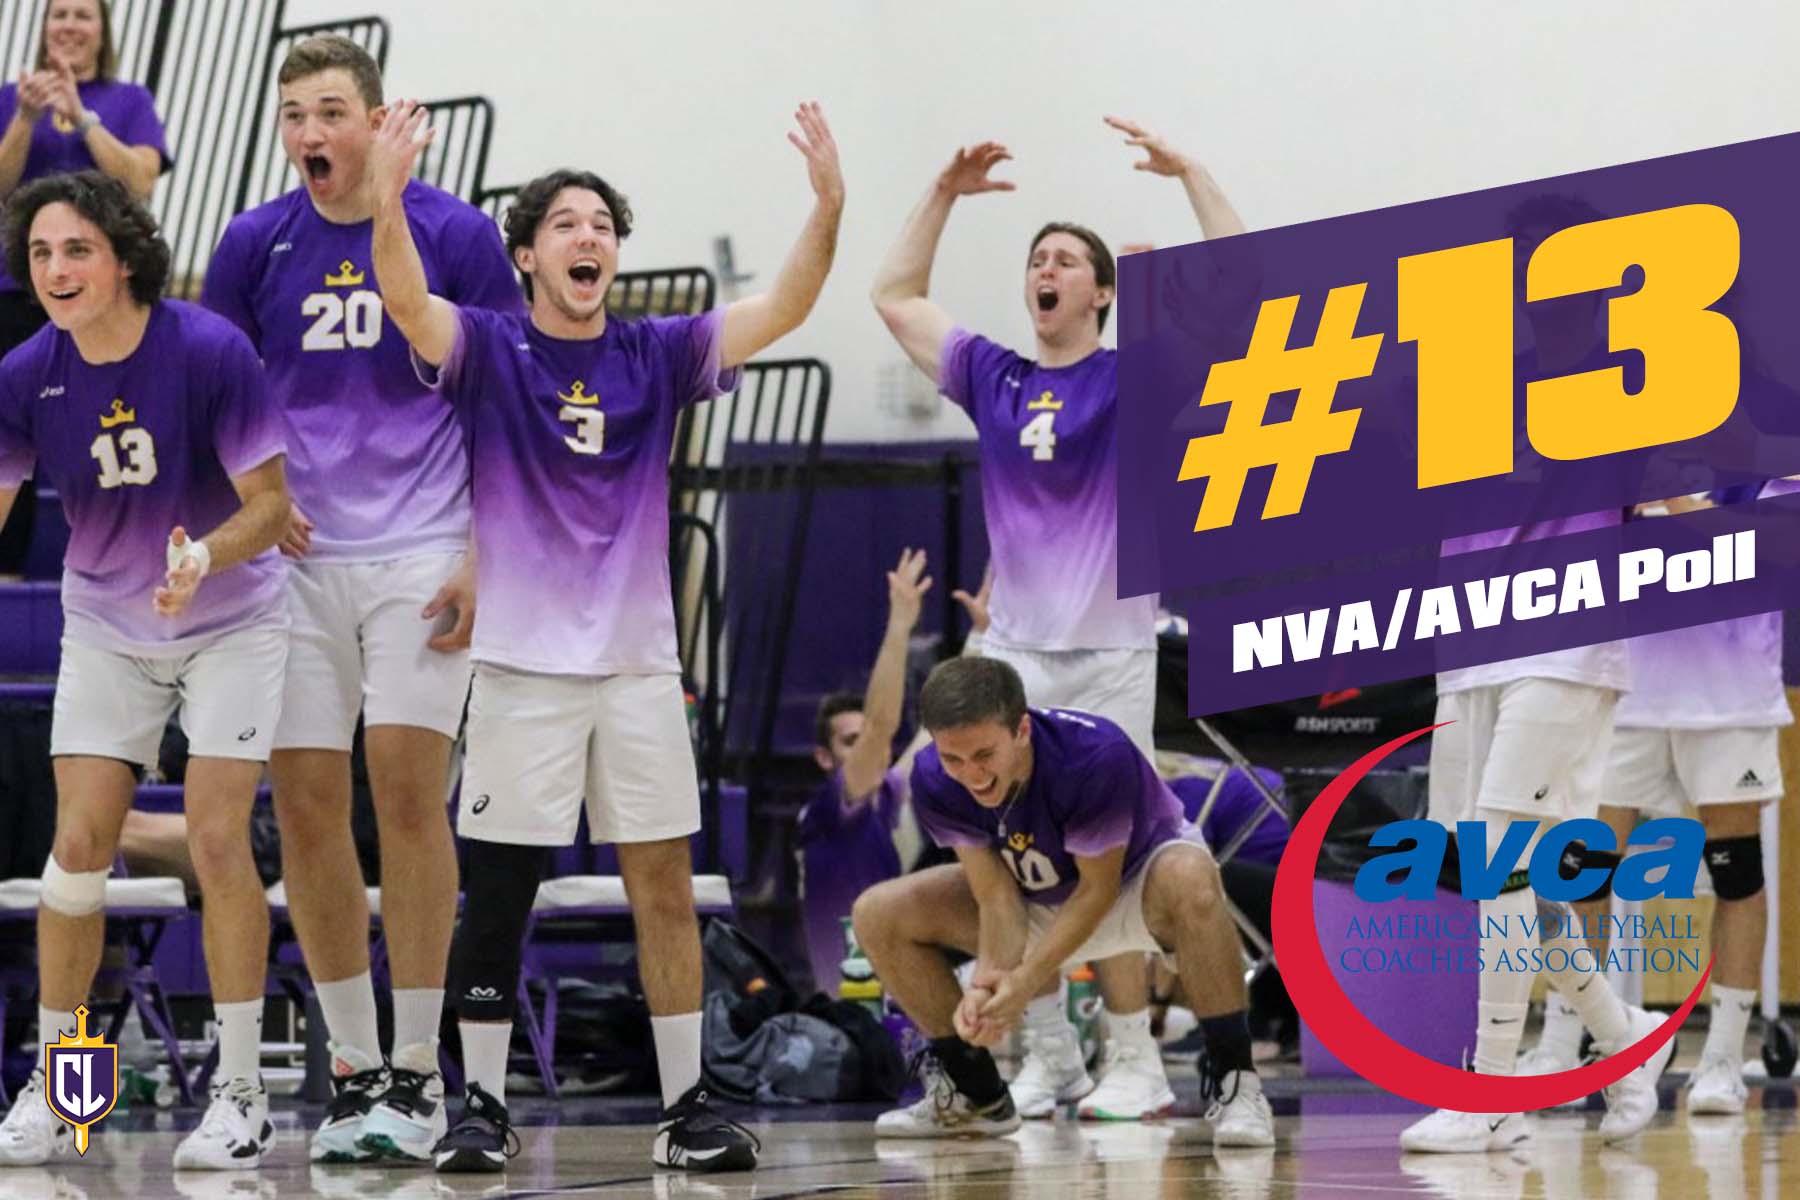 Kingsmen Ranked No. 13 in National Poll